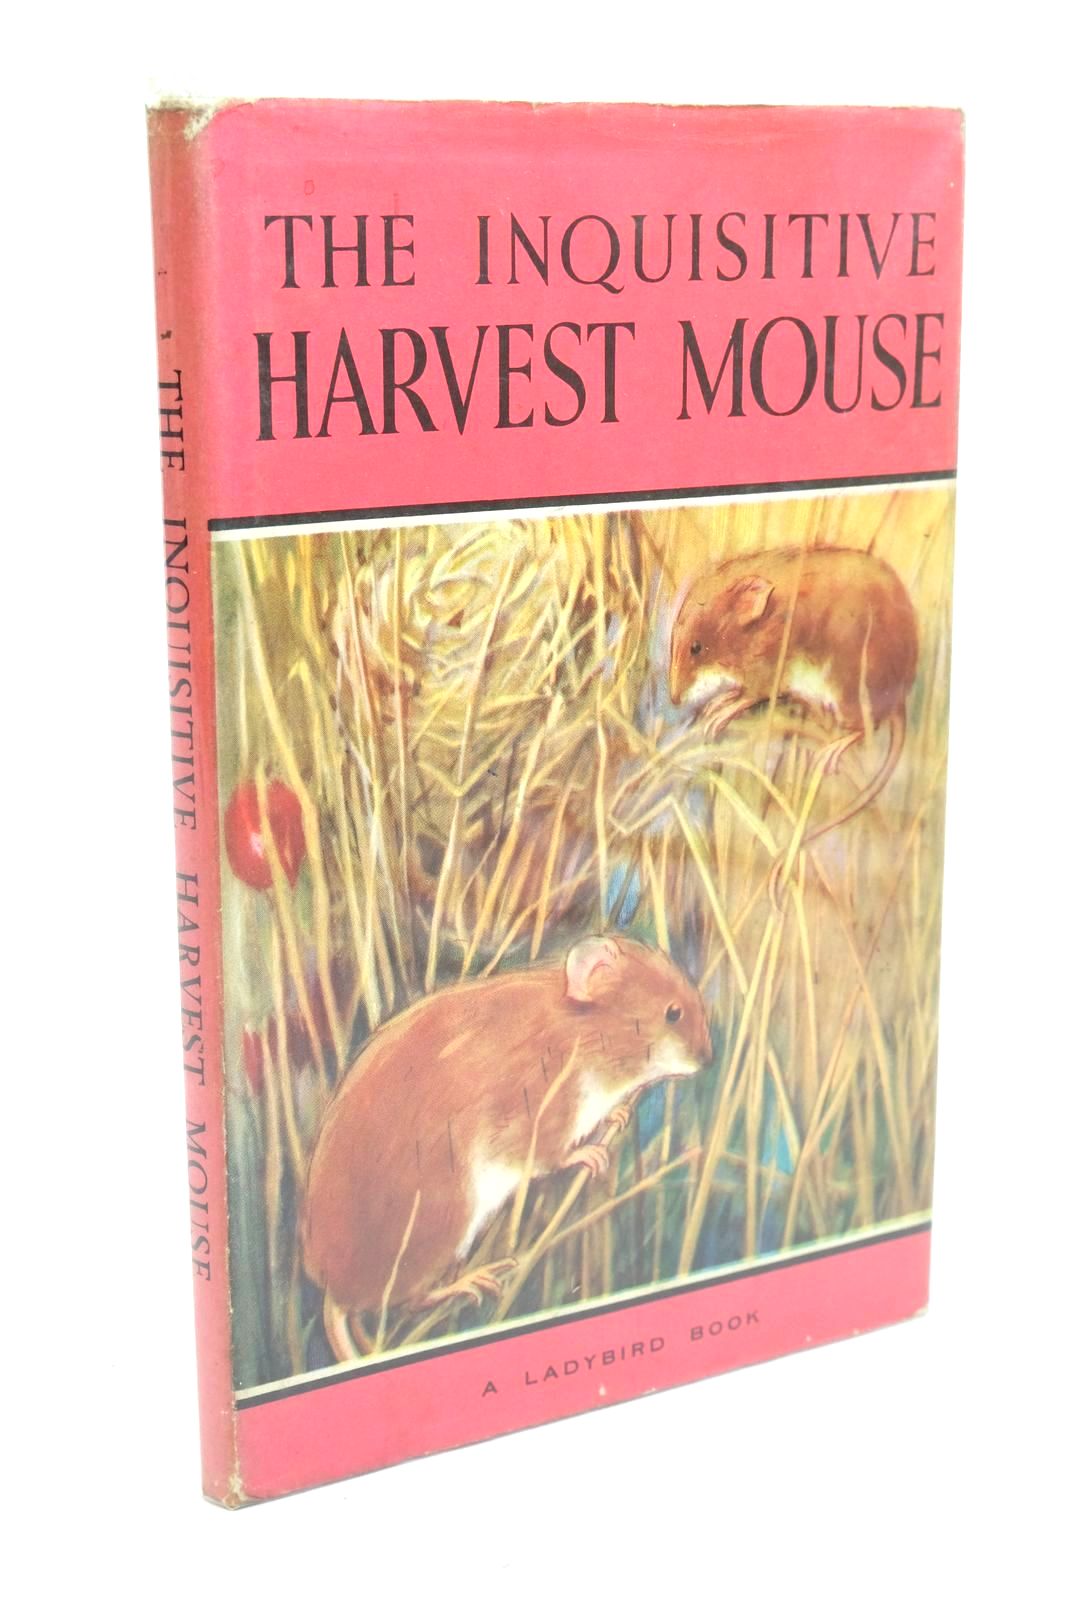 Photo of THE INQUISITIVE HARVEST MOUSE written by Barr, Noel illustrated by Hickling, P.B. published by Wills &amp; Hepworth Ltd. (STOCK CODE: 1322396)  for sale by Stella & Rose's Books